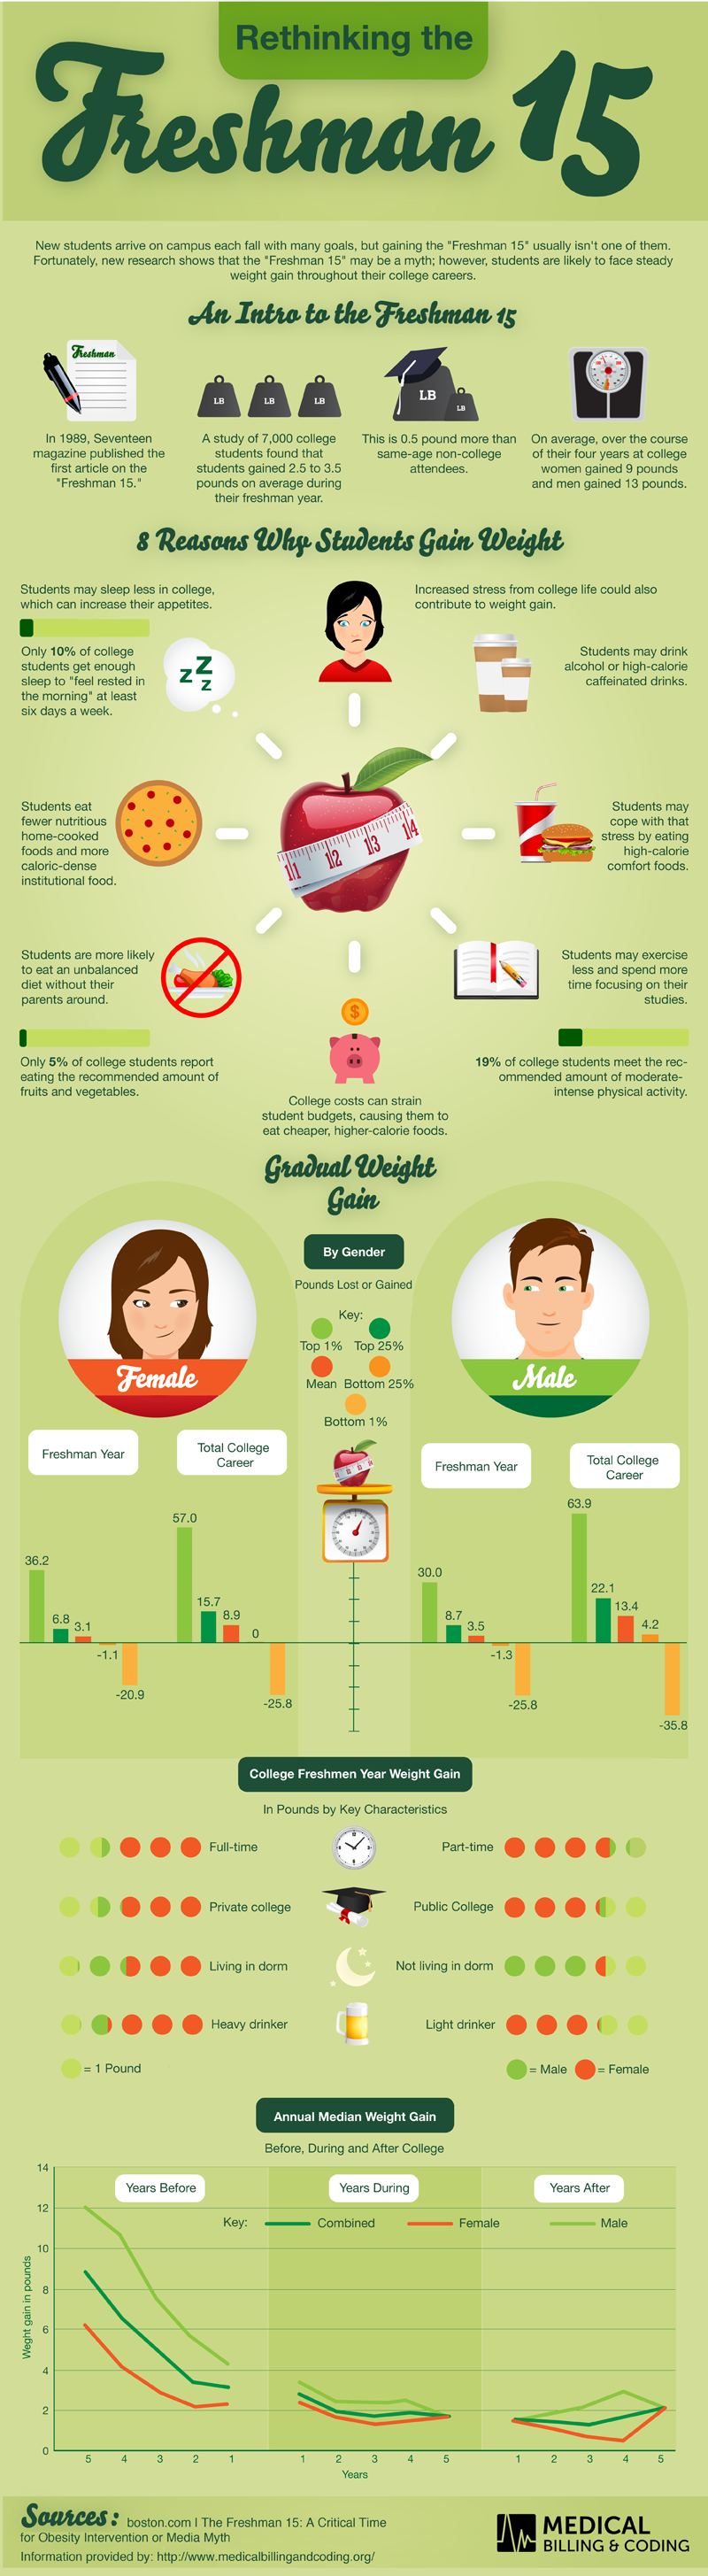 InfoGraphic on Weight Gain in College,